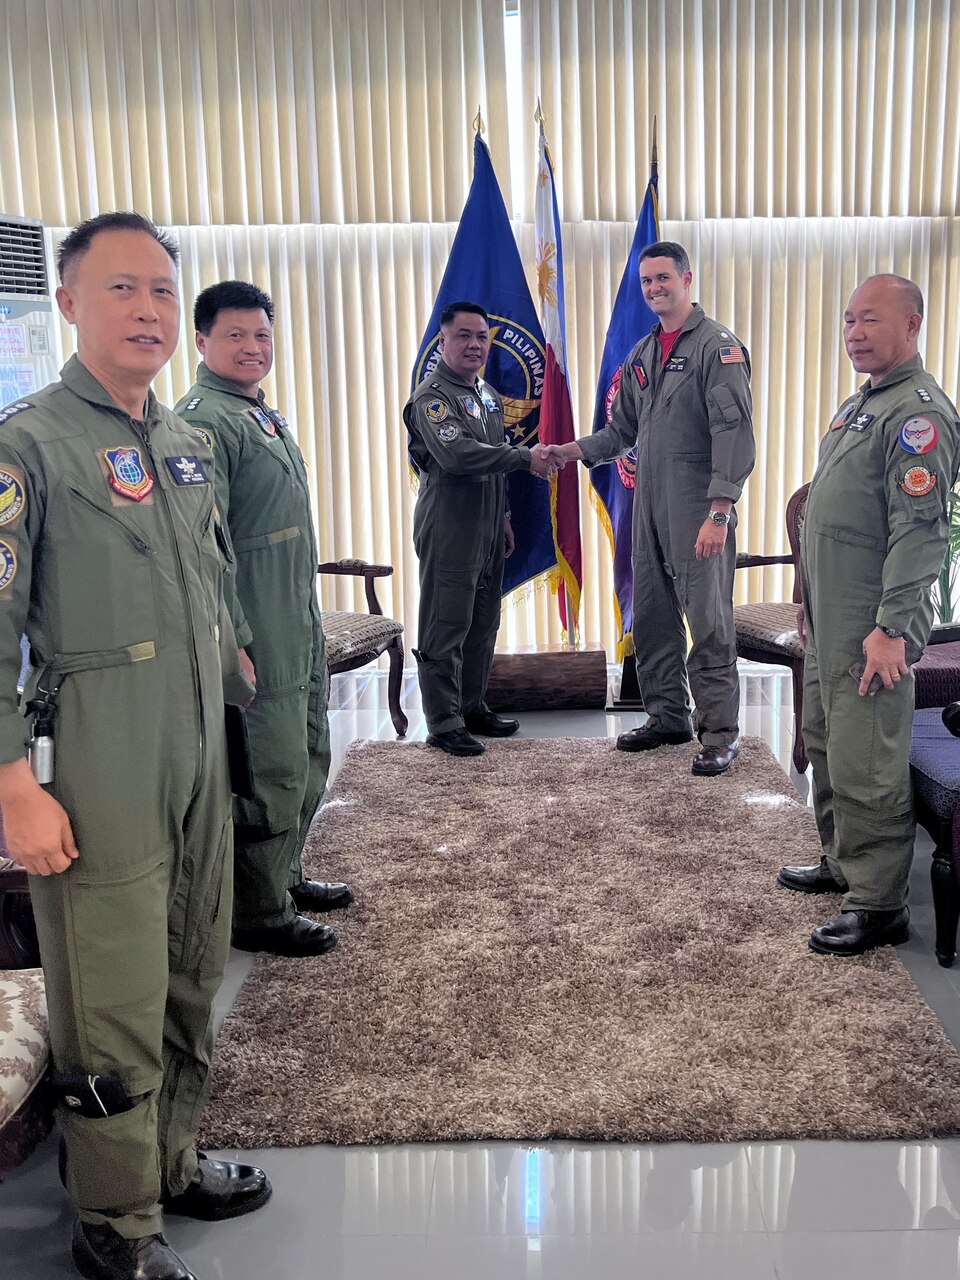 Maj. Gen. Joannis Leonardi B. Dimaano, commander, Air Mobility Command, and Cmdr. Marc Hines, commanding officer of the “Red Lancers” of Patrol Squadron (VP) 10, shake hands during a meeting as part of a weeklong engagement promoting joint regional security and partnerships out of Mactan, Philippines. VP-10 is based in Jacksonville, Florida and is currently operating from Kadena Air Base in Okinawa, Japan. It conducts maritime patrol and reconnaissance, as well as theater outreach operations, as part of a rotational deployment to the U.S. 7th Fleet area of operations. (U.S. Navy photo by Lt. j.g. Travis Goebel)